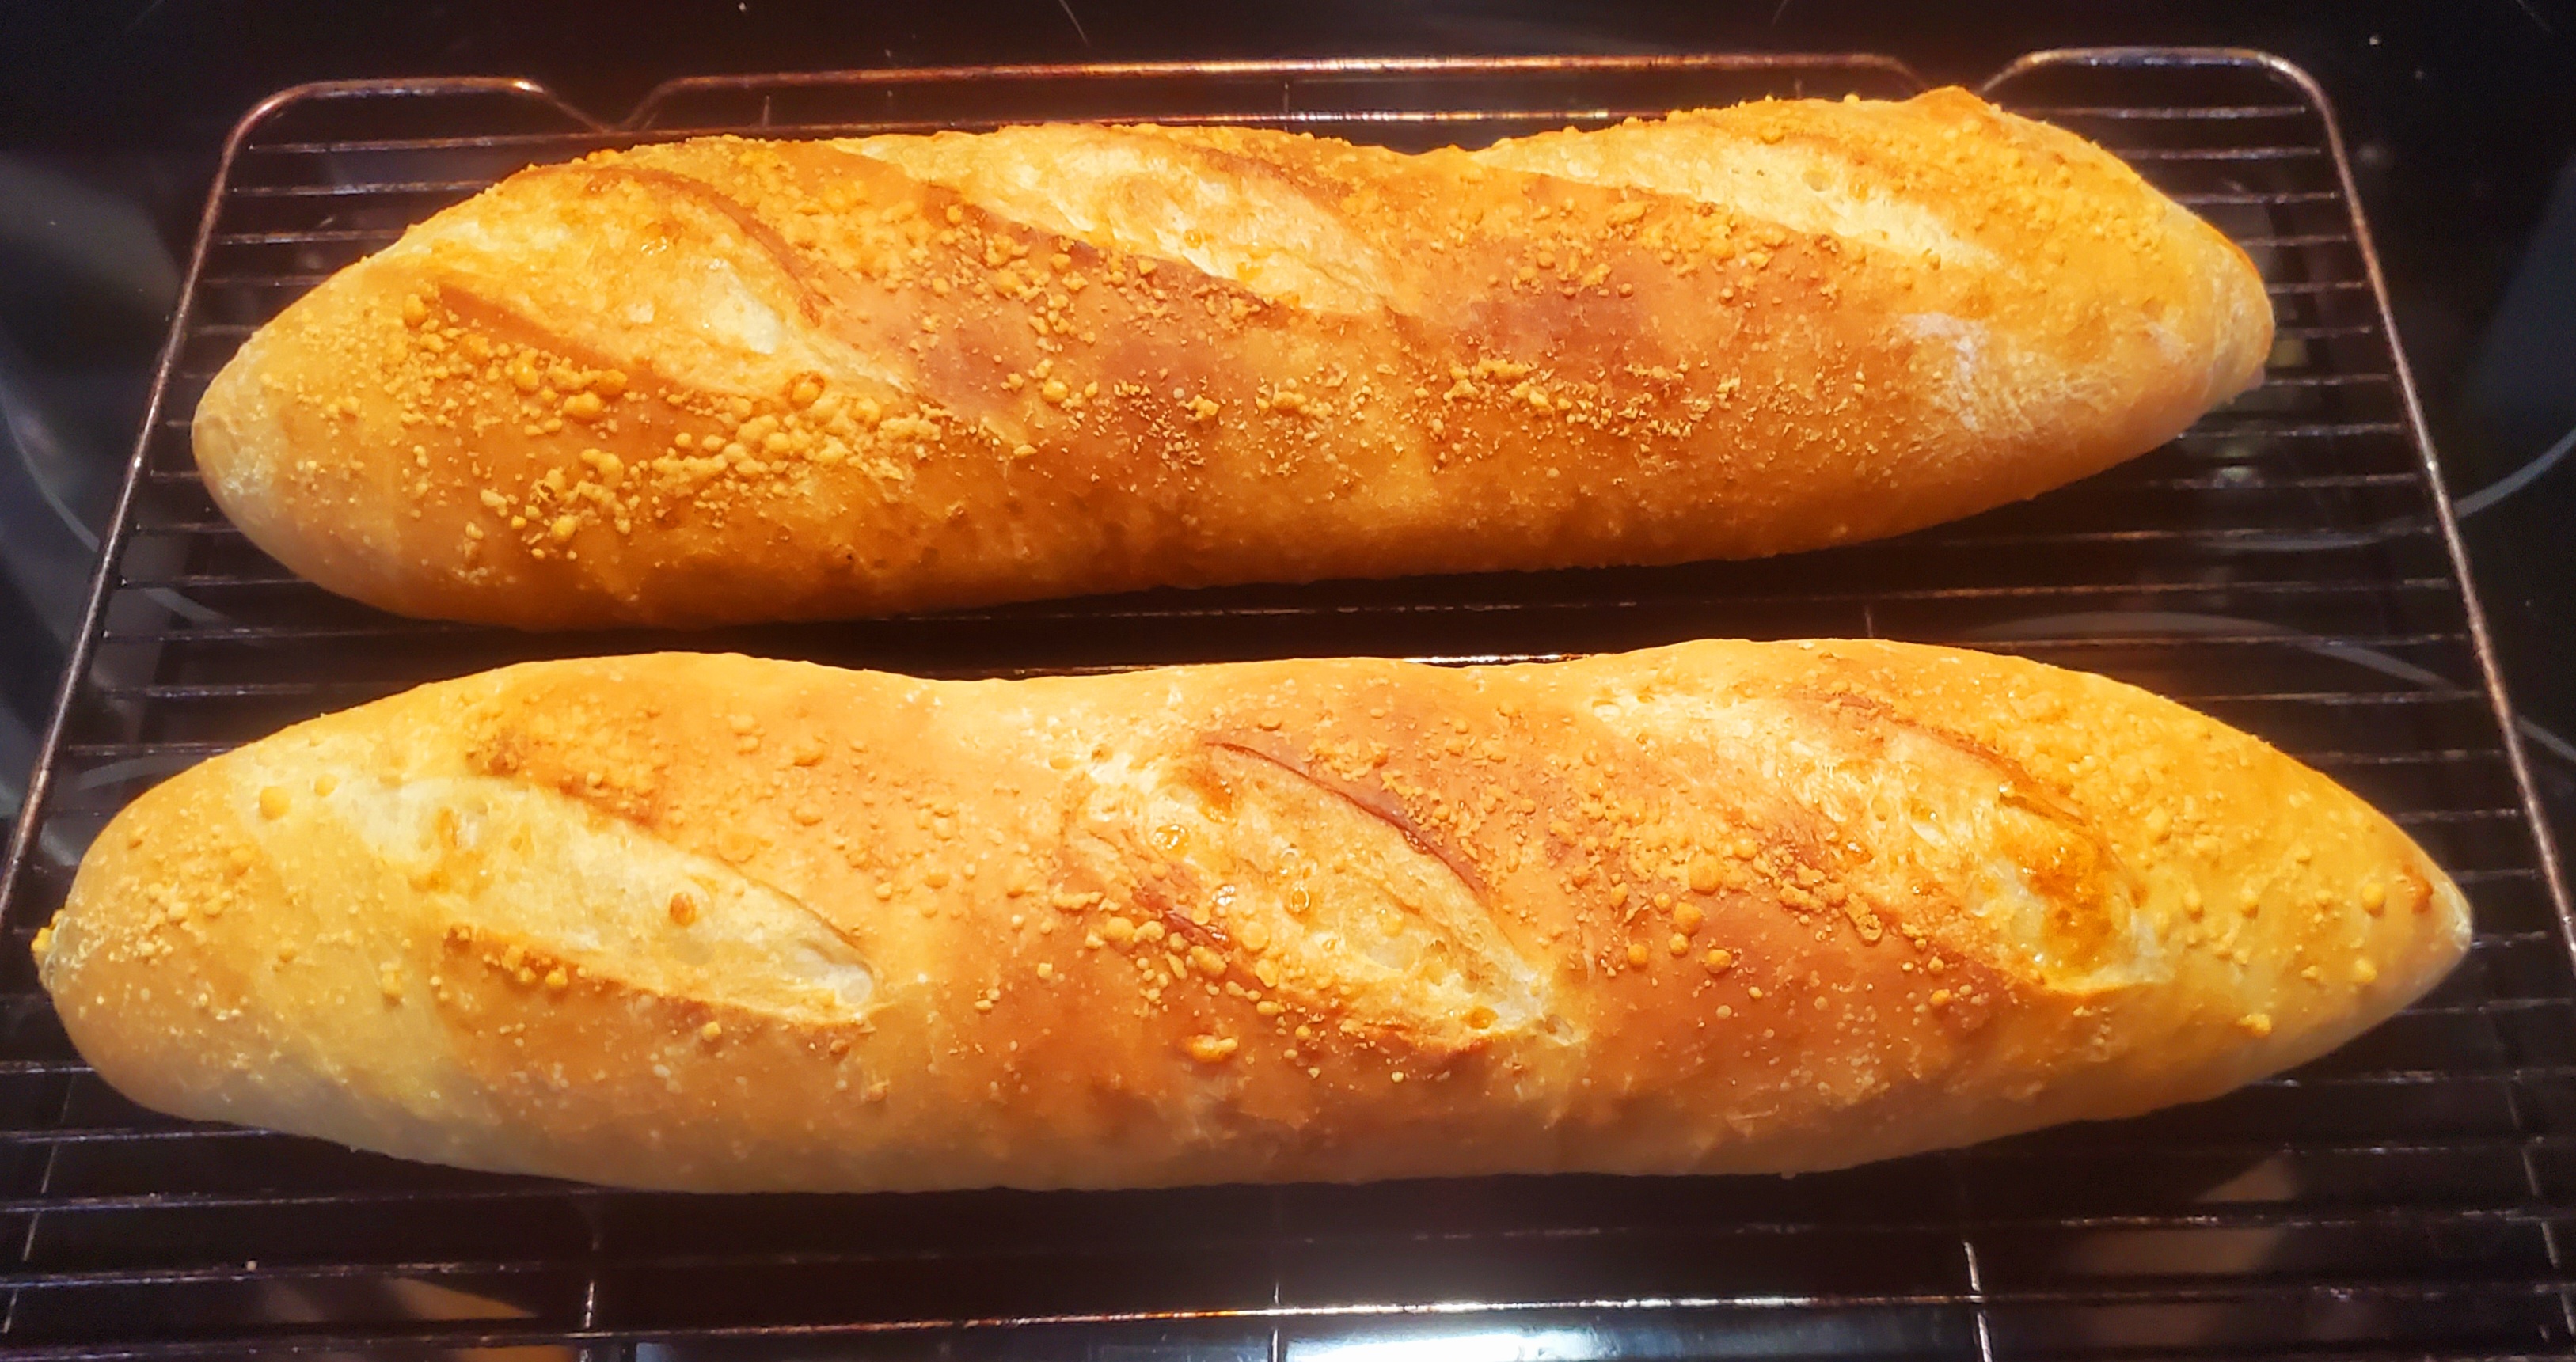 Baguettes from left over pizza dough.